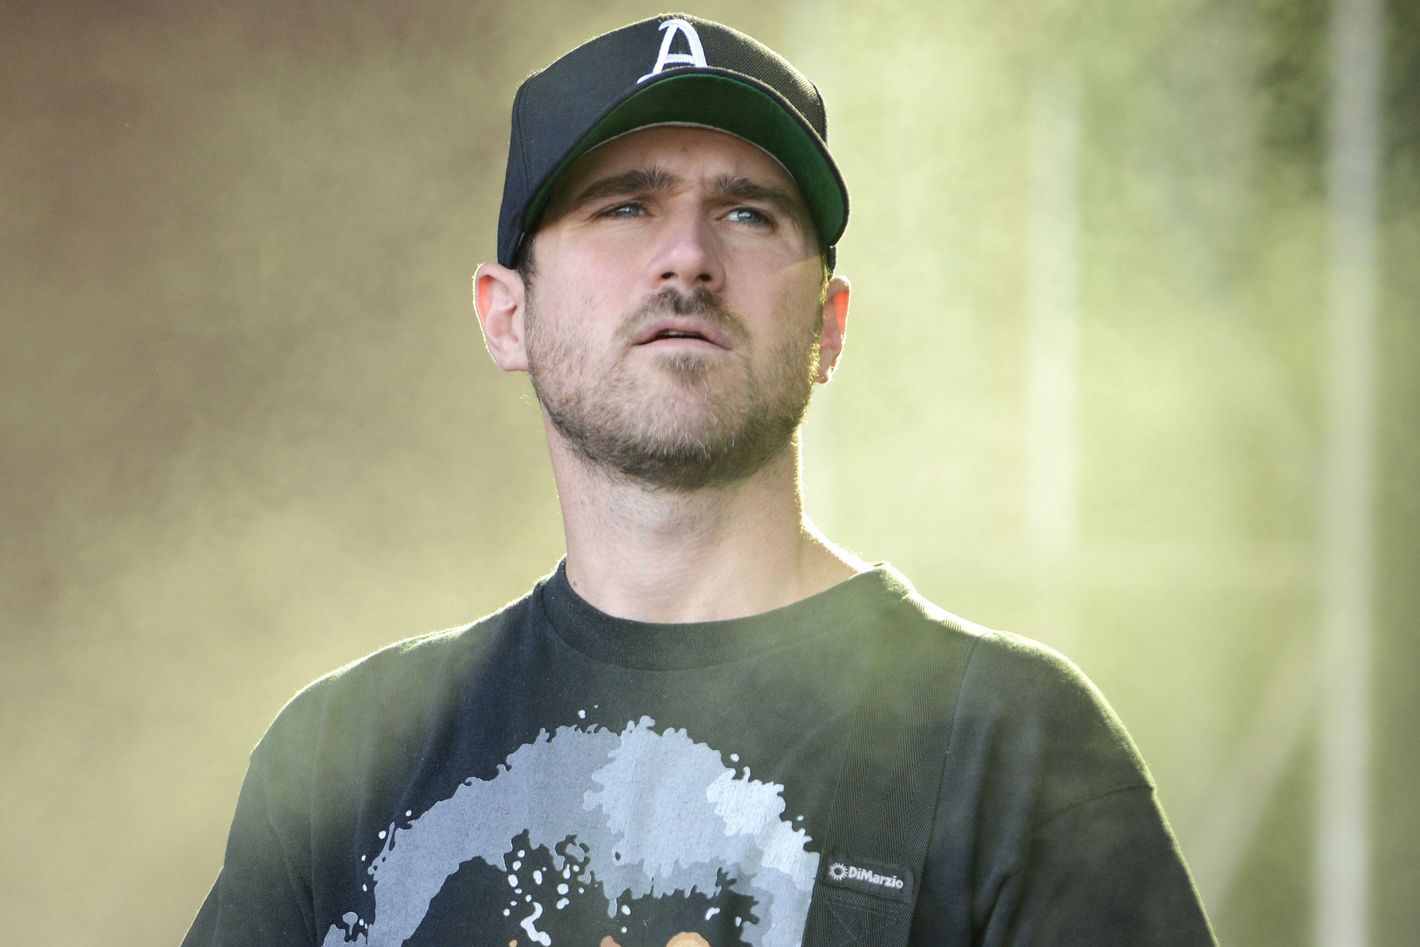 Brand New's Jesse Lacey covers 'Bad Day' by R.E.M. • News • DIY